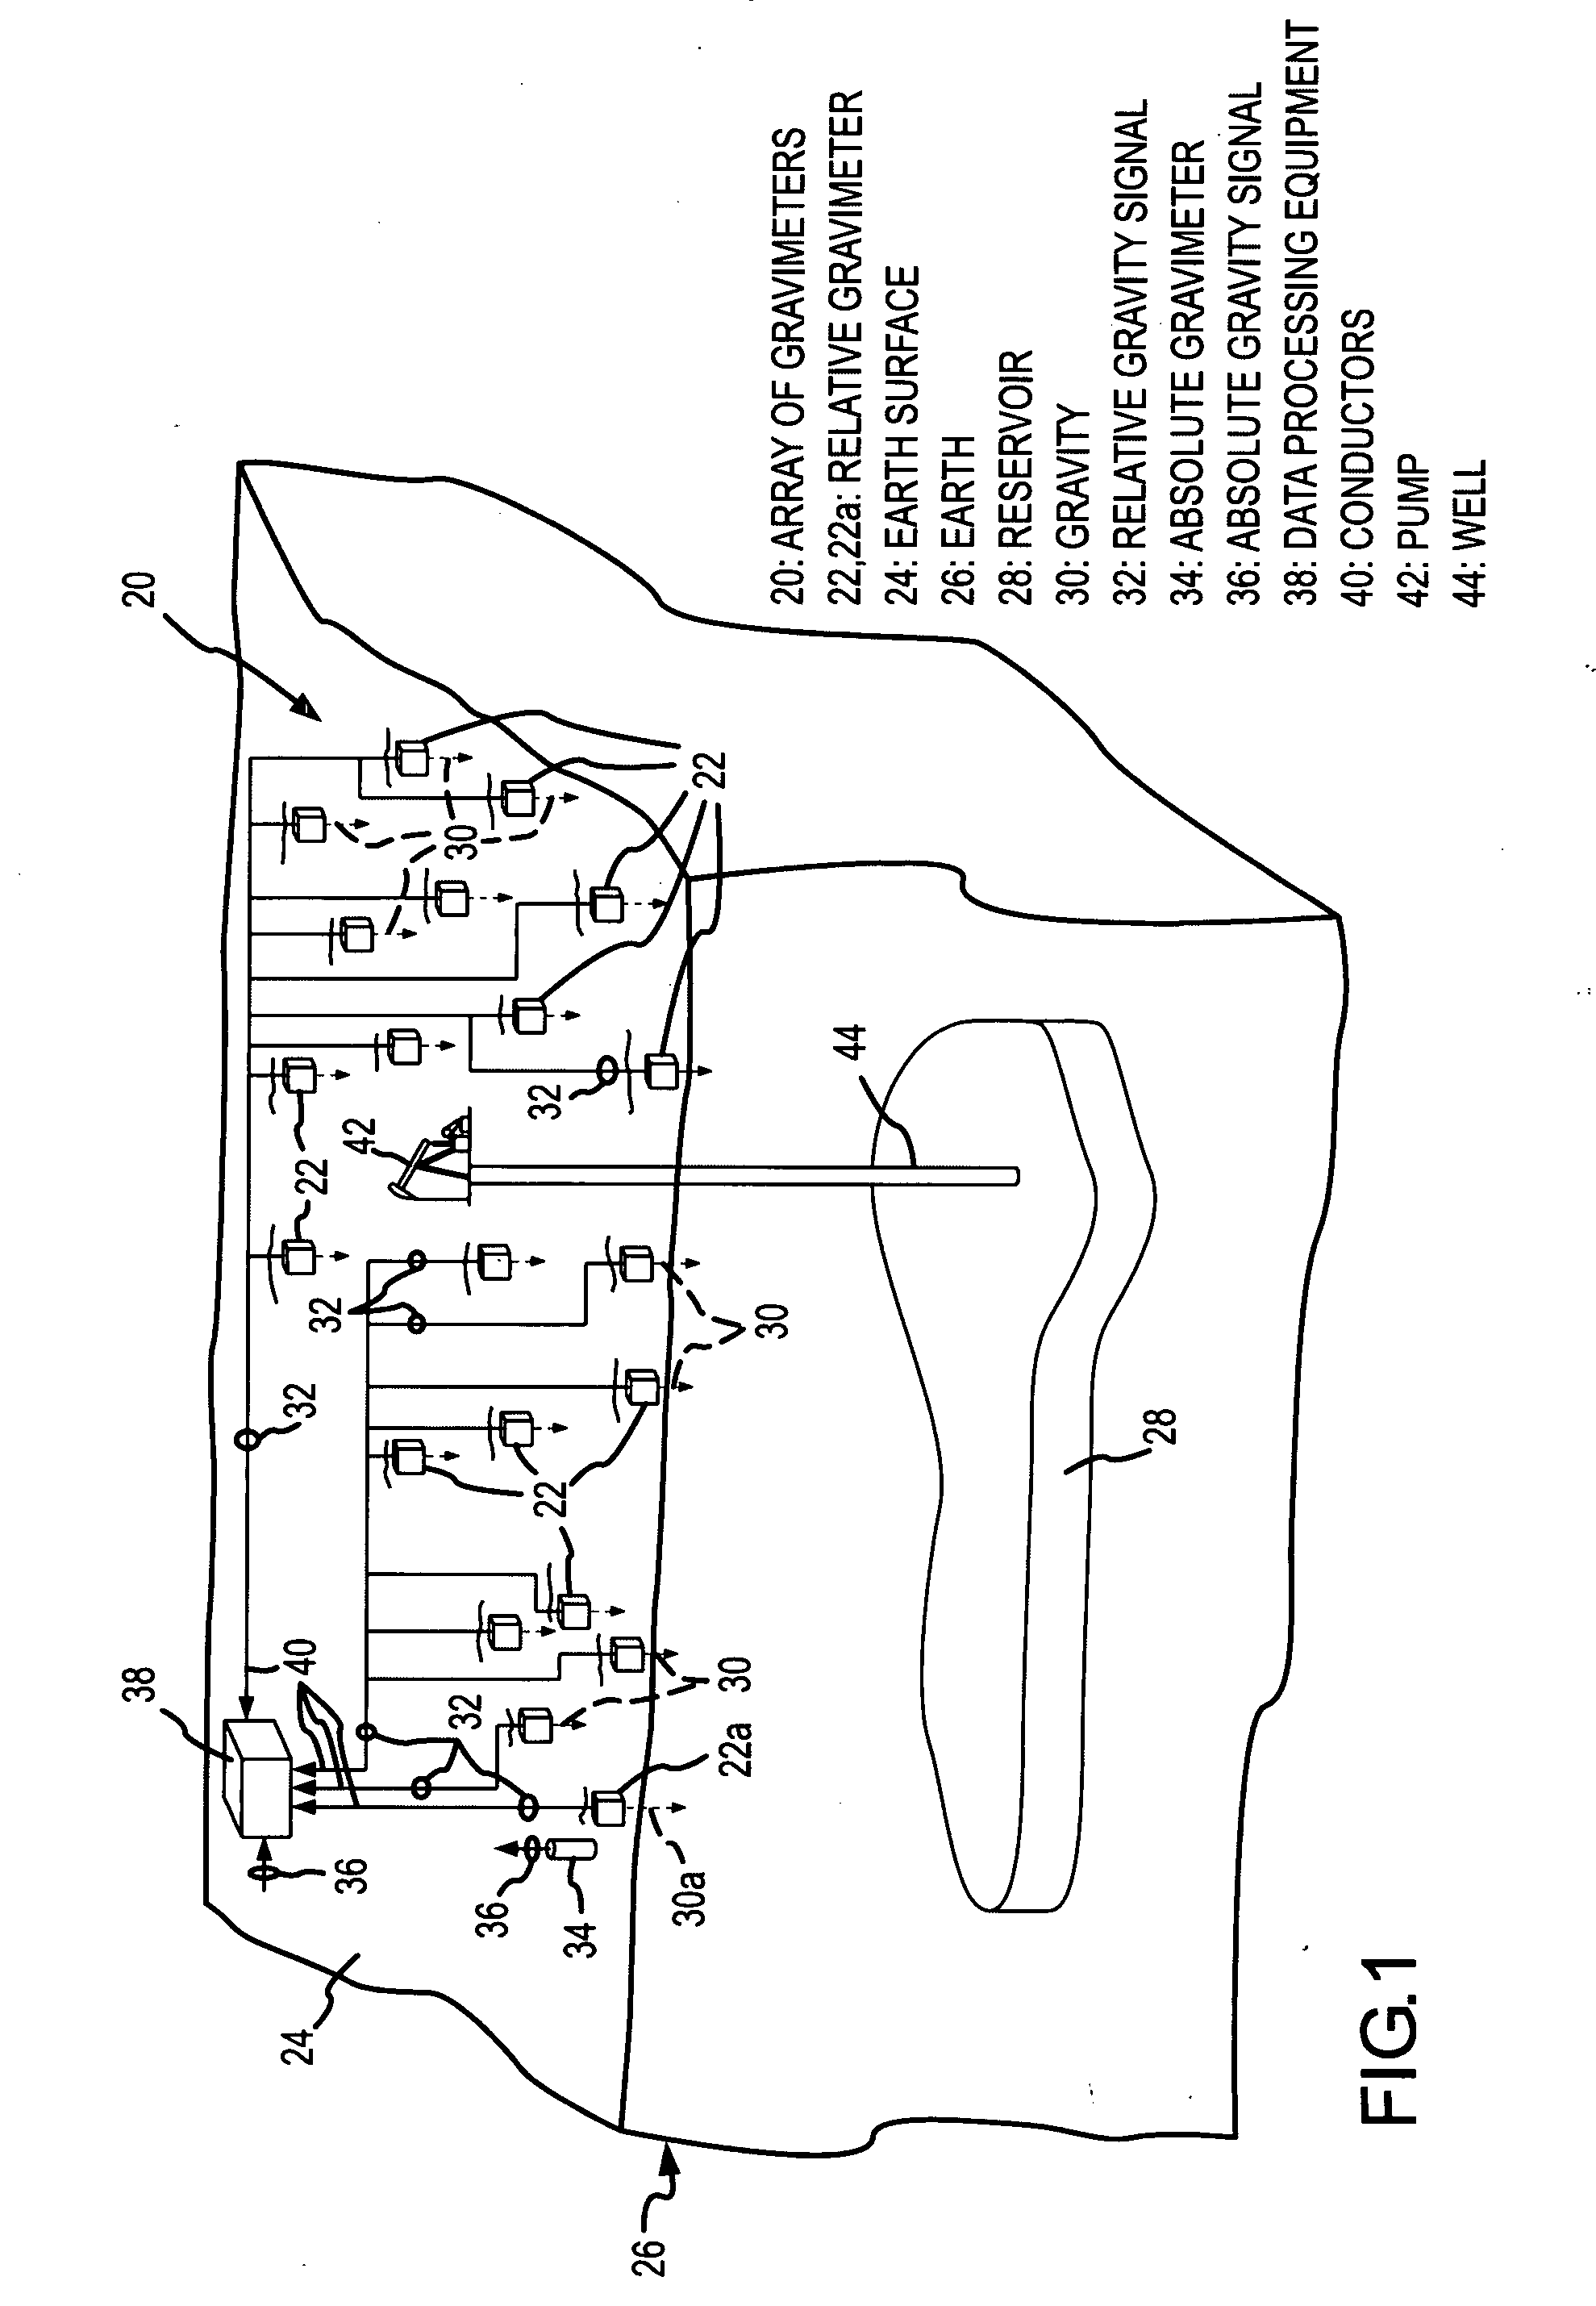 Accurate dynamic gravity measurement method and apparatus